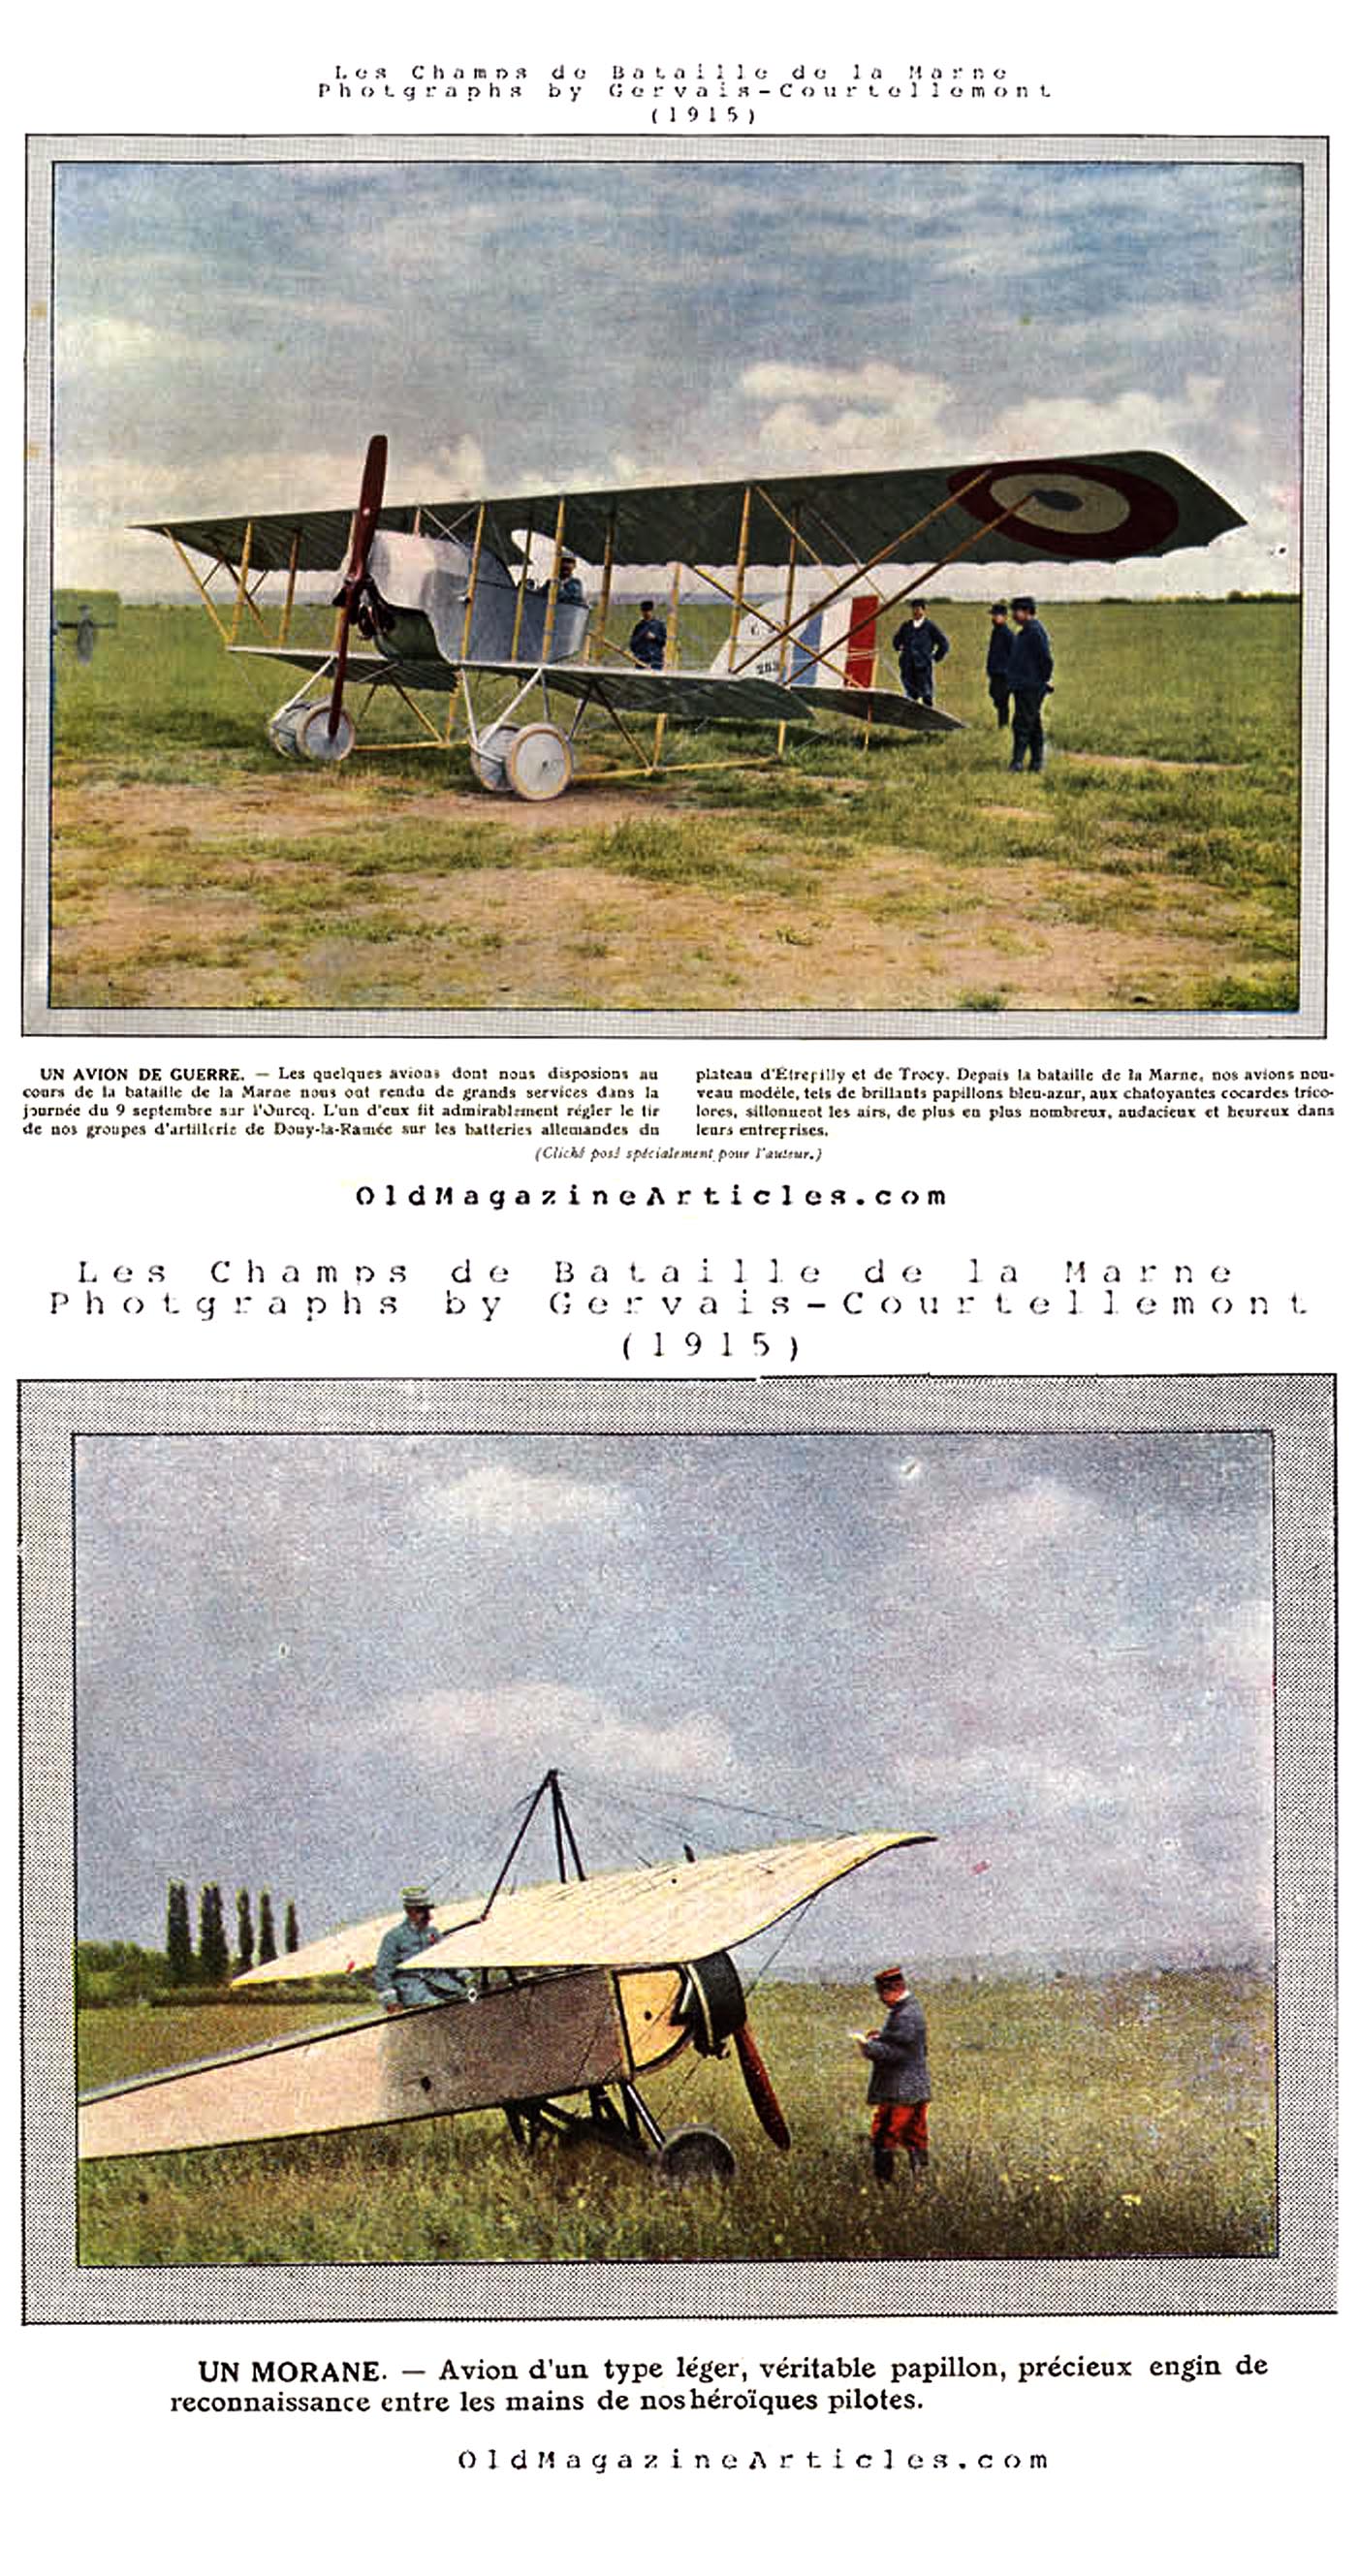 Two Color Photographs of French Military Aircraft (1915)